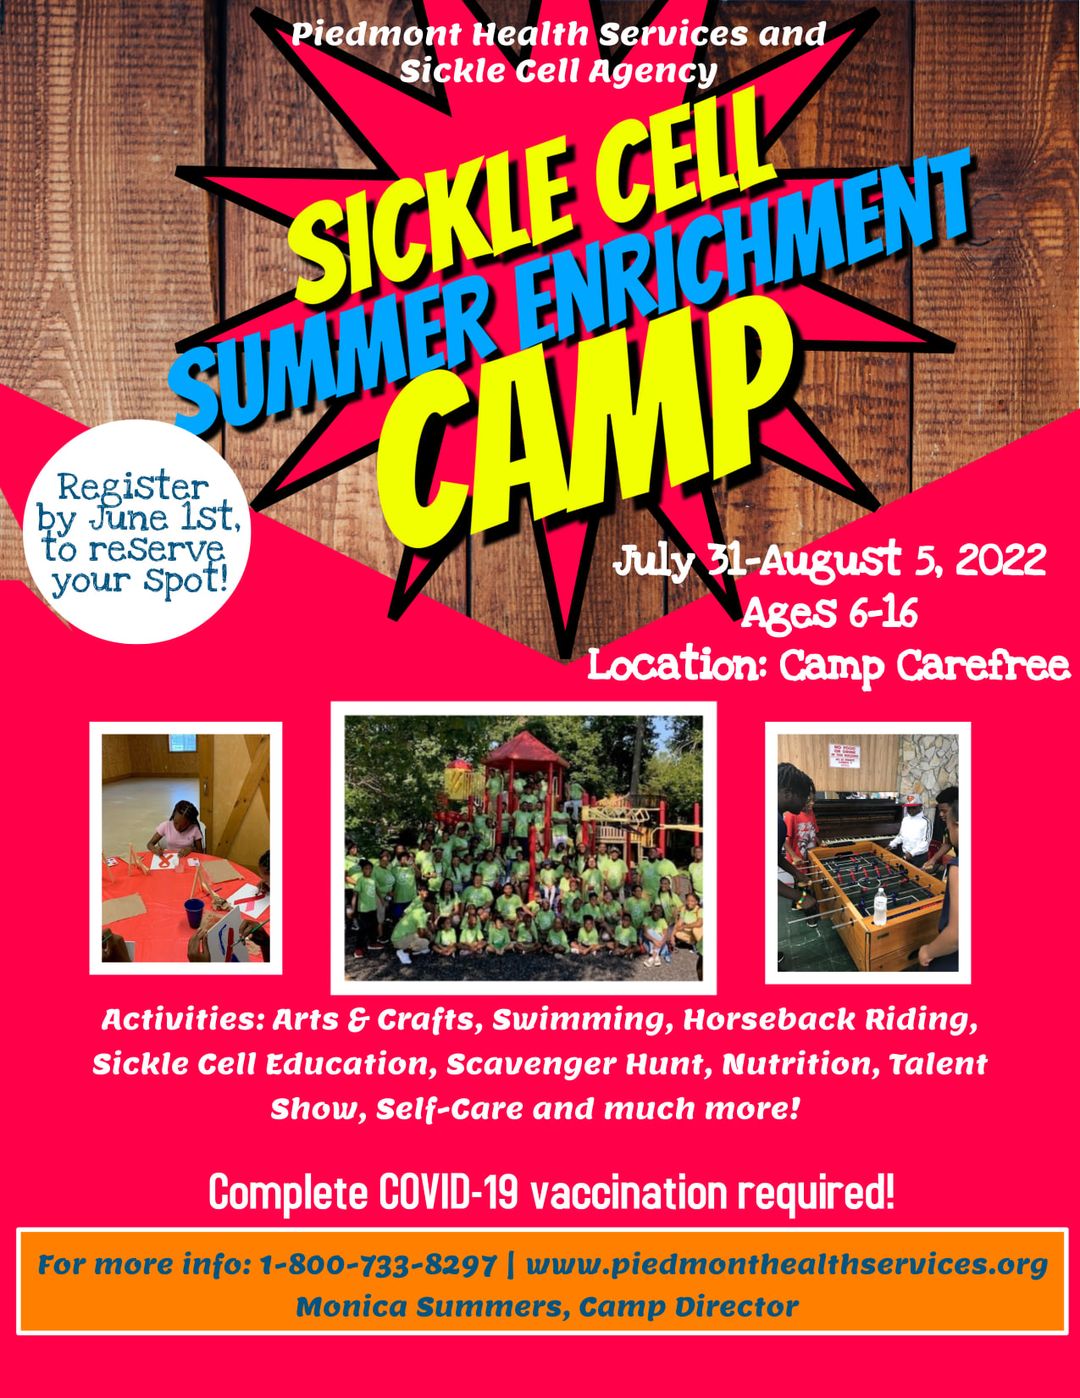 Sickle Cell Summer Enrichment Camp: Piedmont Health Services And Sickle Cell Agency 